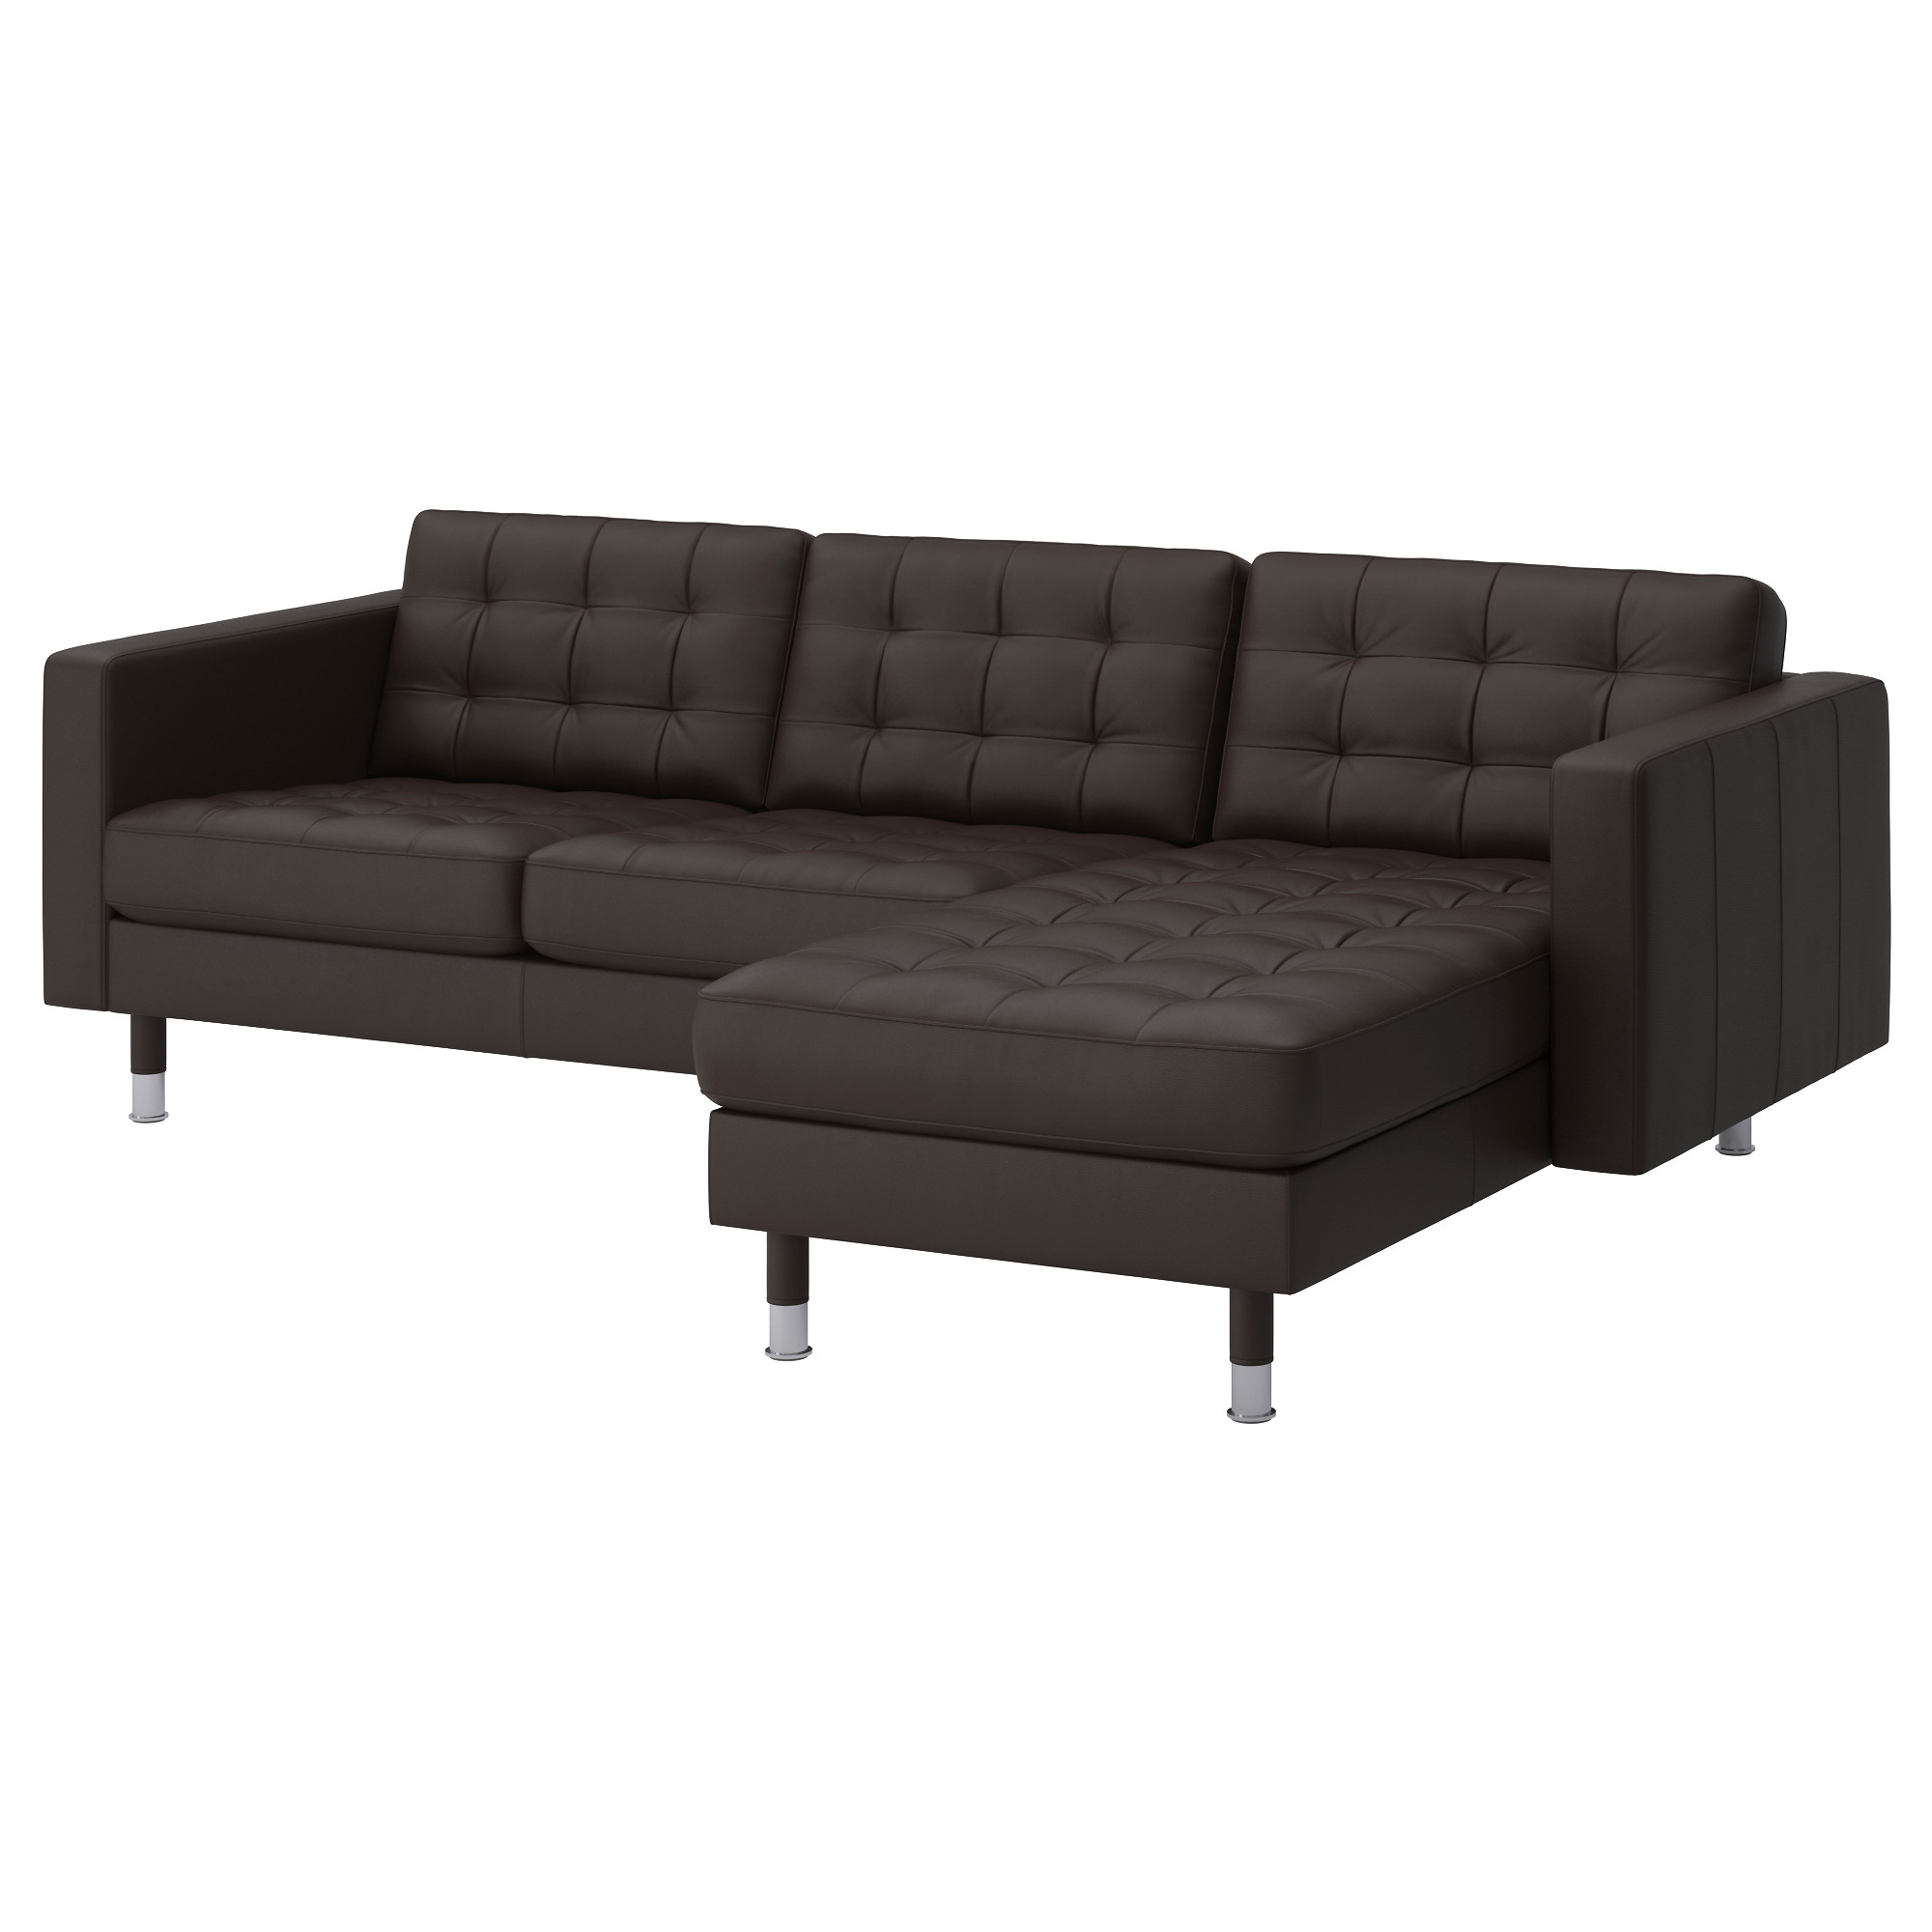 59031882 Landskrona Leather - Faux Leather Sofas IKEA khmer in phnom penh cambodia